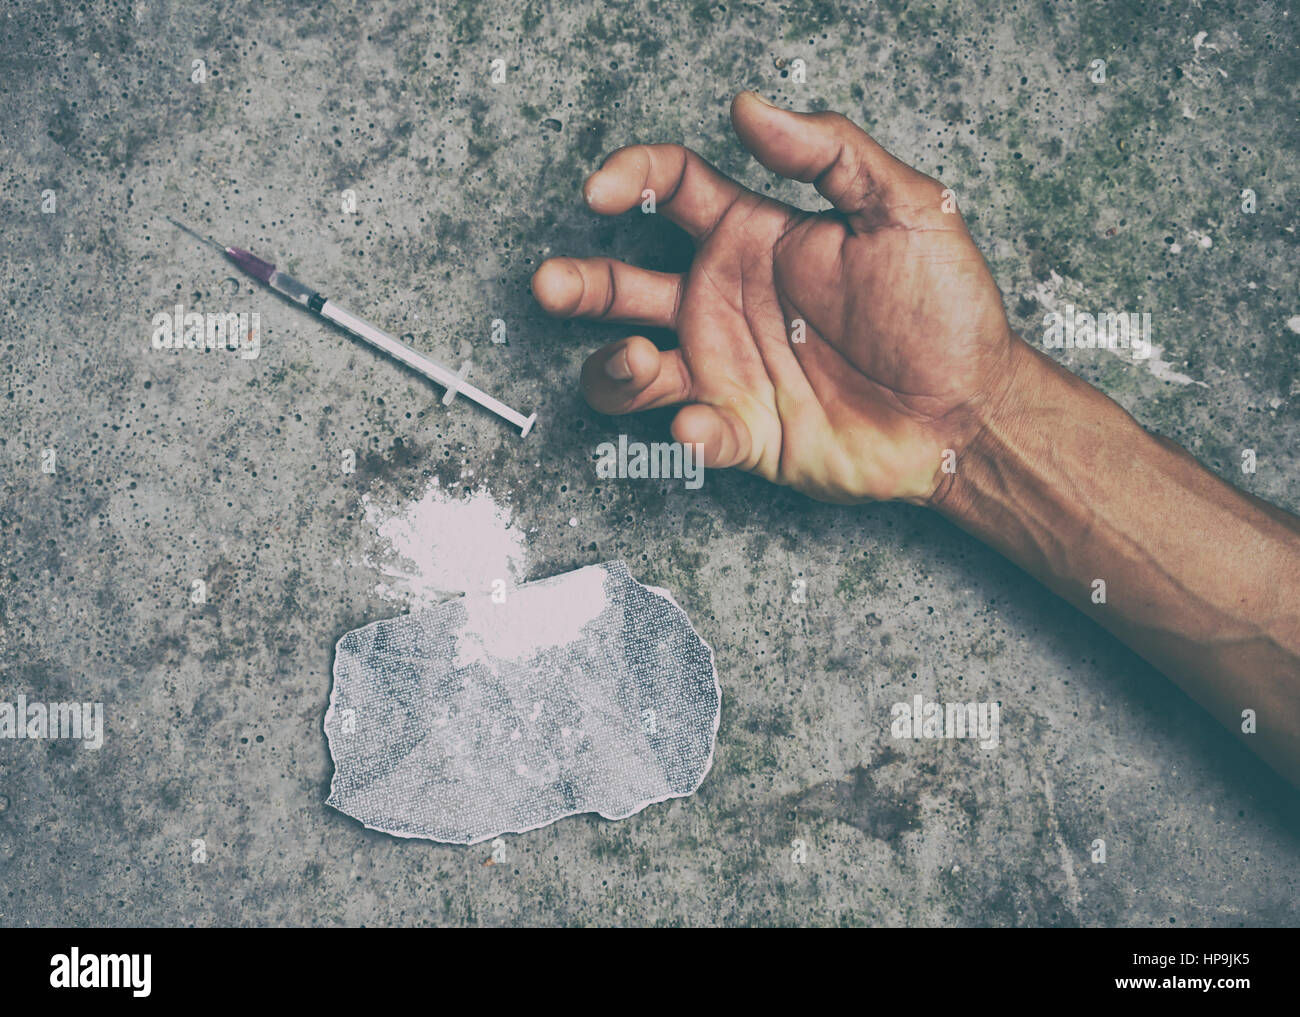 drug addict man with syringe in action Stock Photo